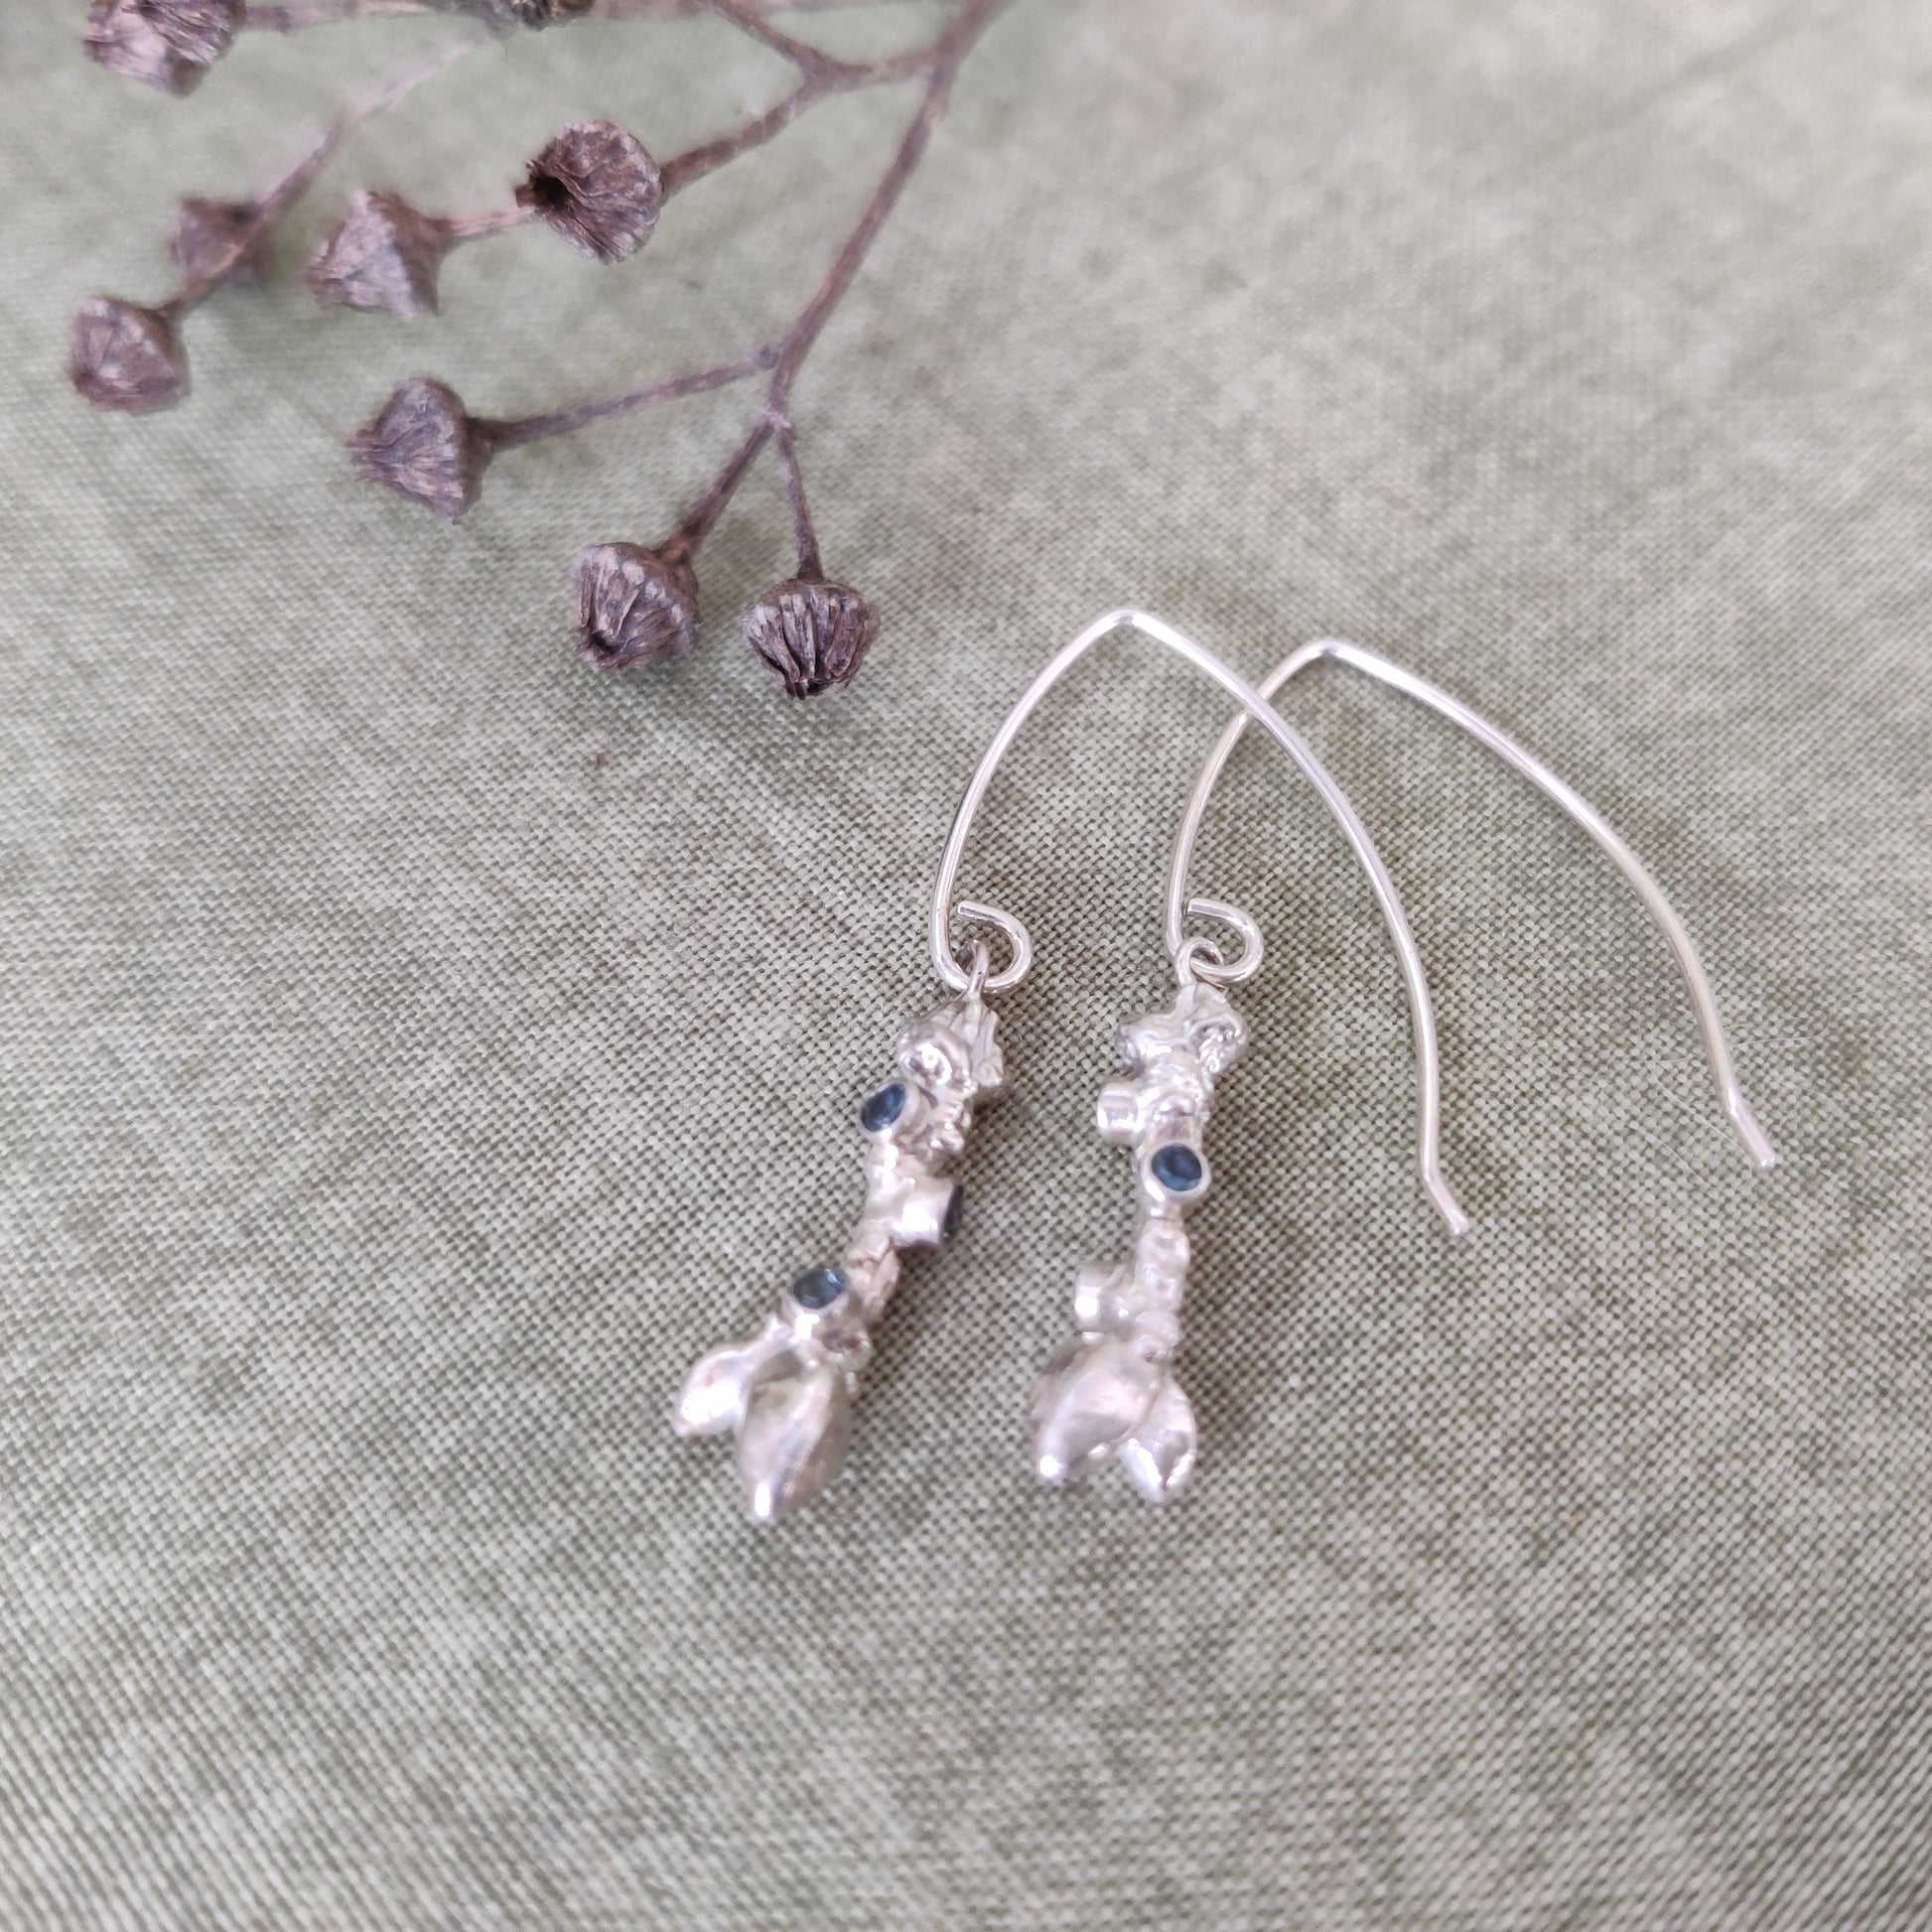 Woodland inspired droplet earrings handcrafted in sterling silver